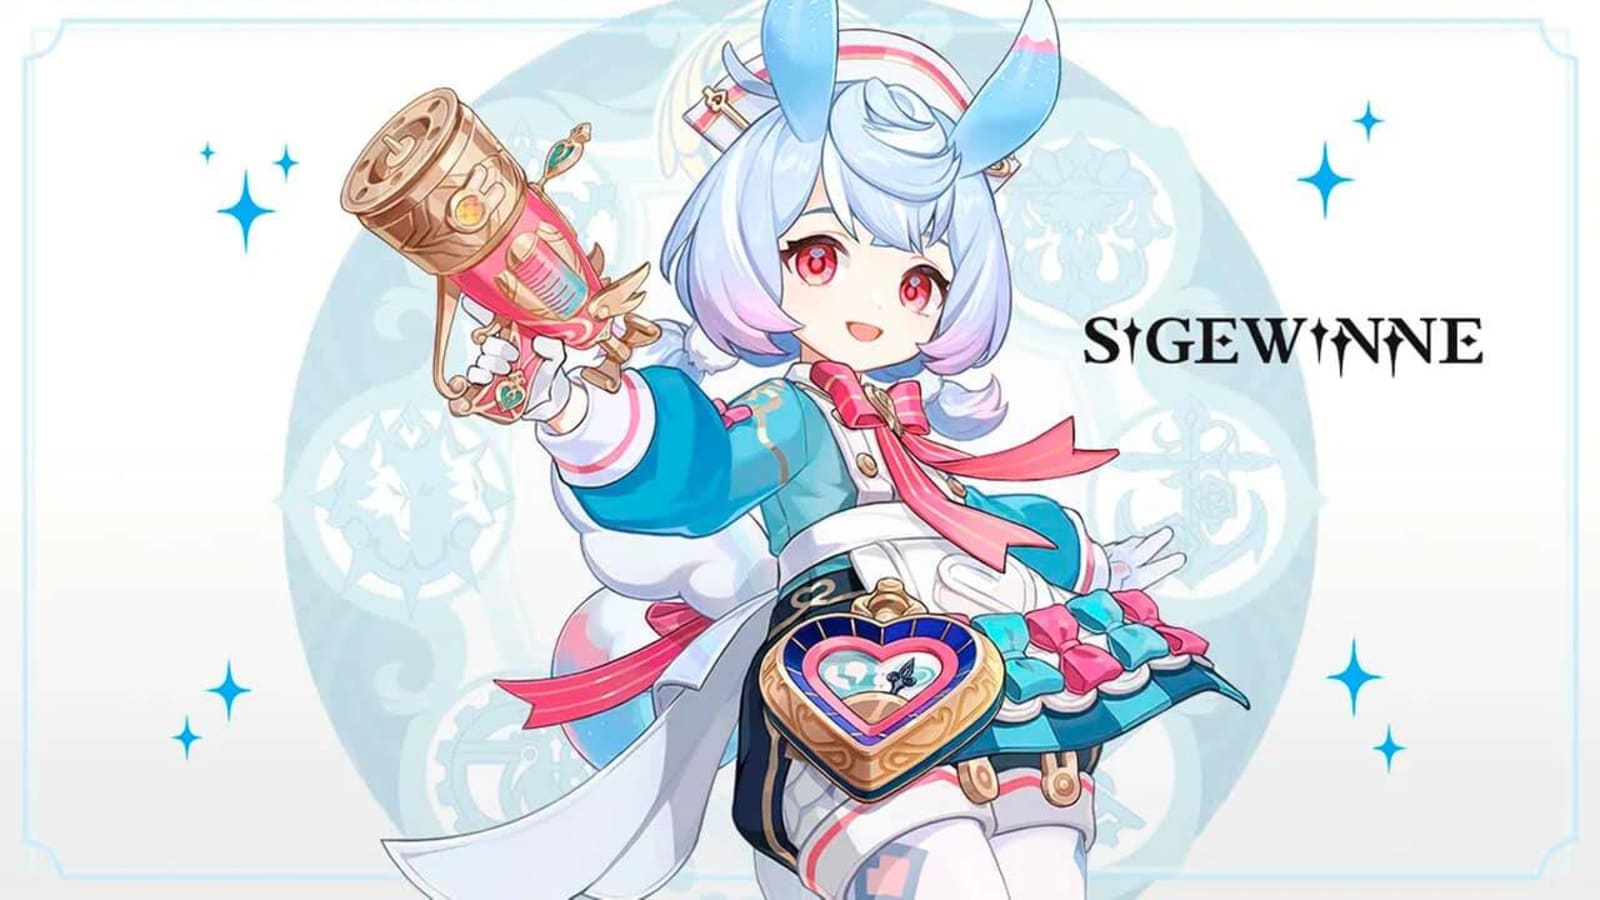 Genshin Impact – Sigewinne Drip Marketing and Official Reveal!